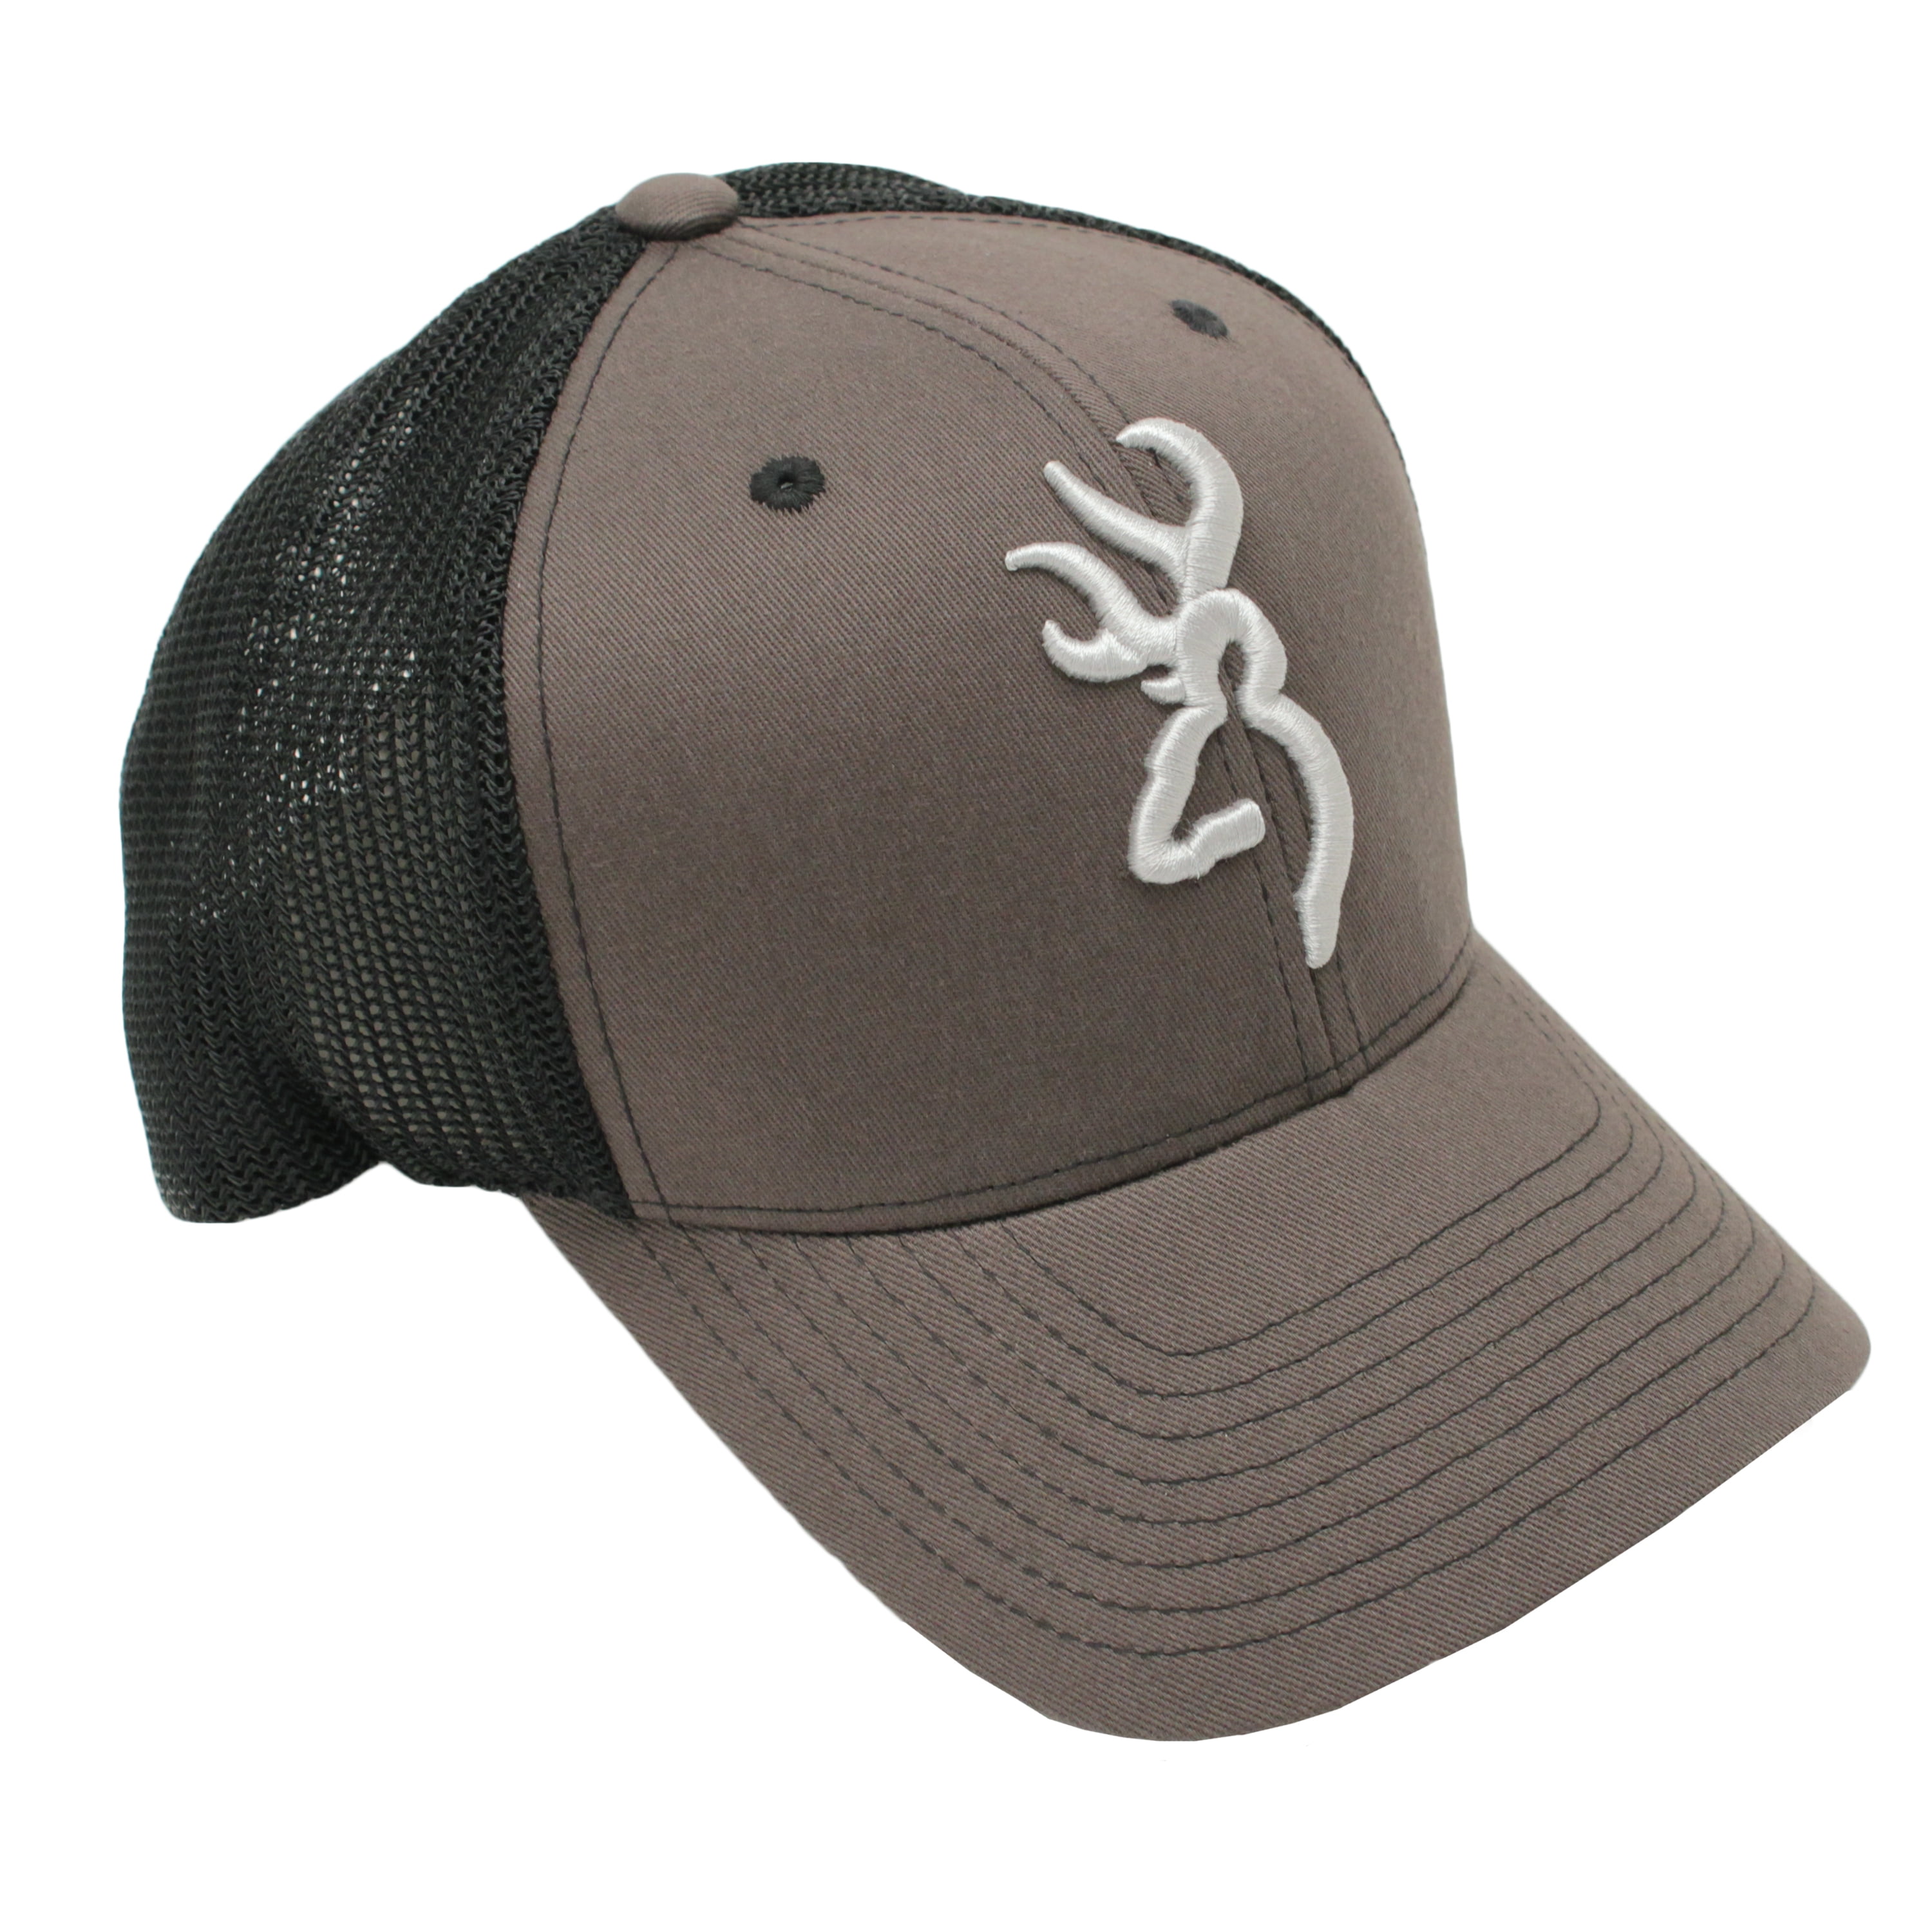 Browning Colstrip Flex Fit Caps CHOOSE YOUR SIZE AND COLOR 